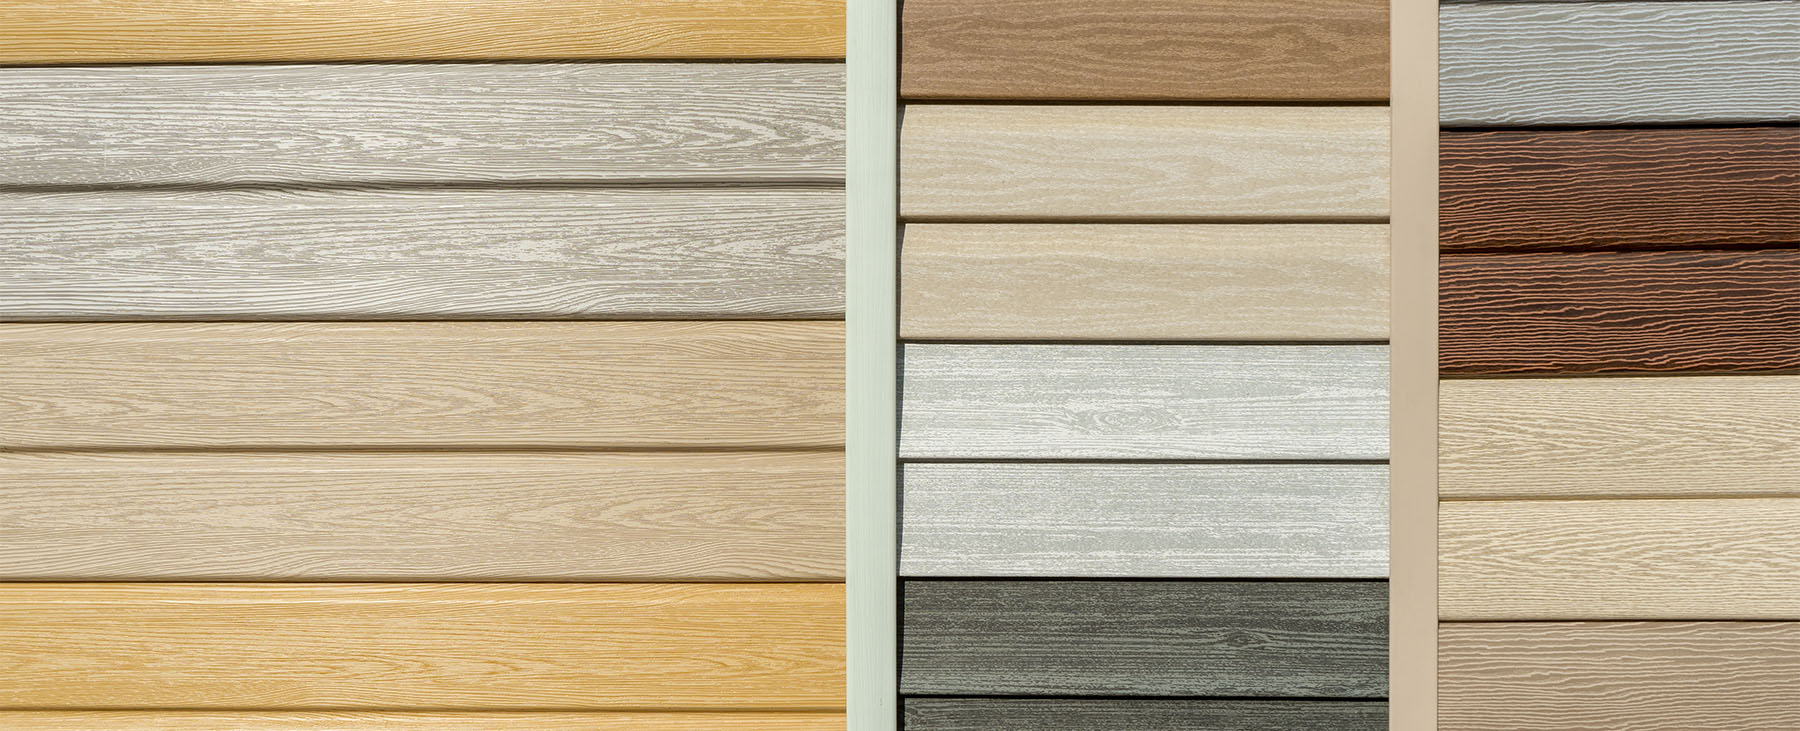 ind-siding and paneling